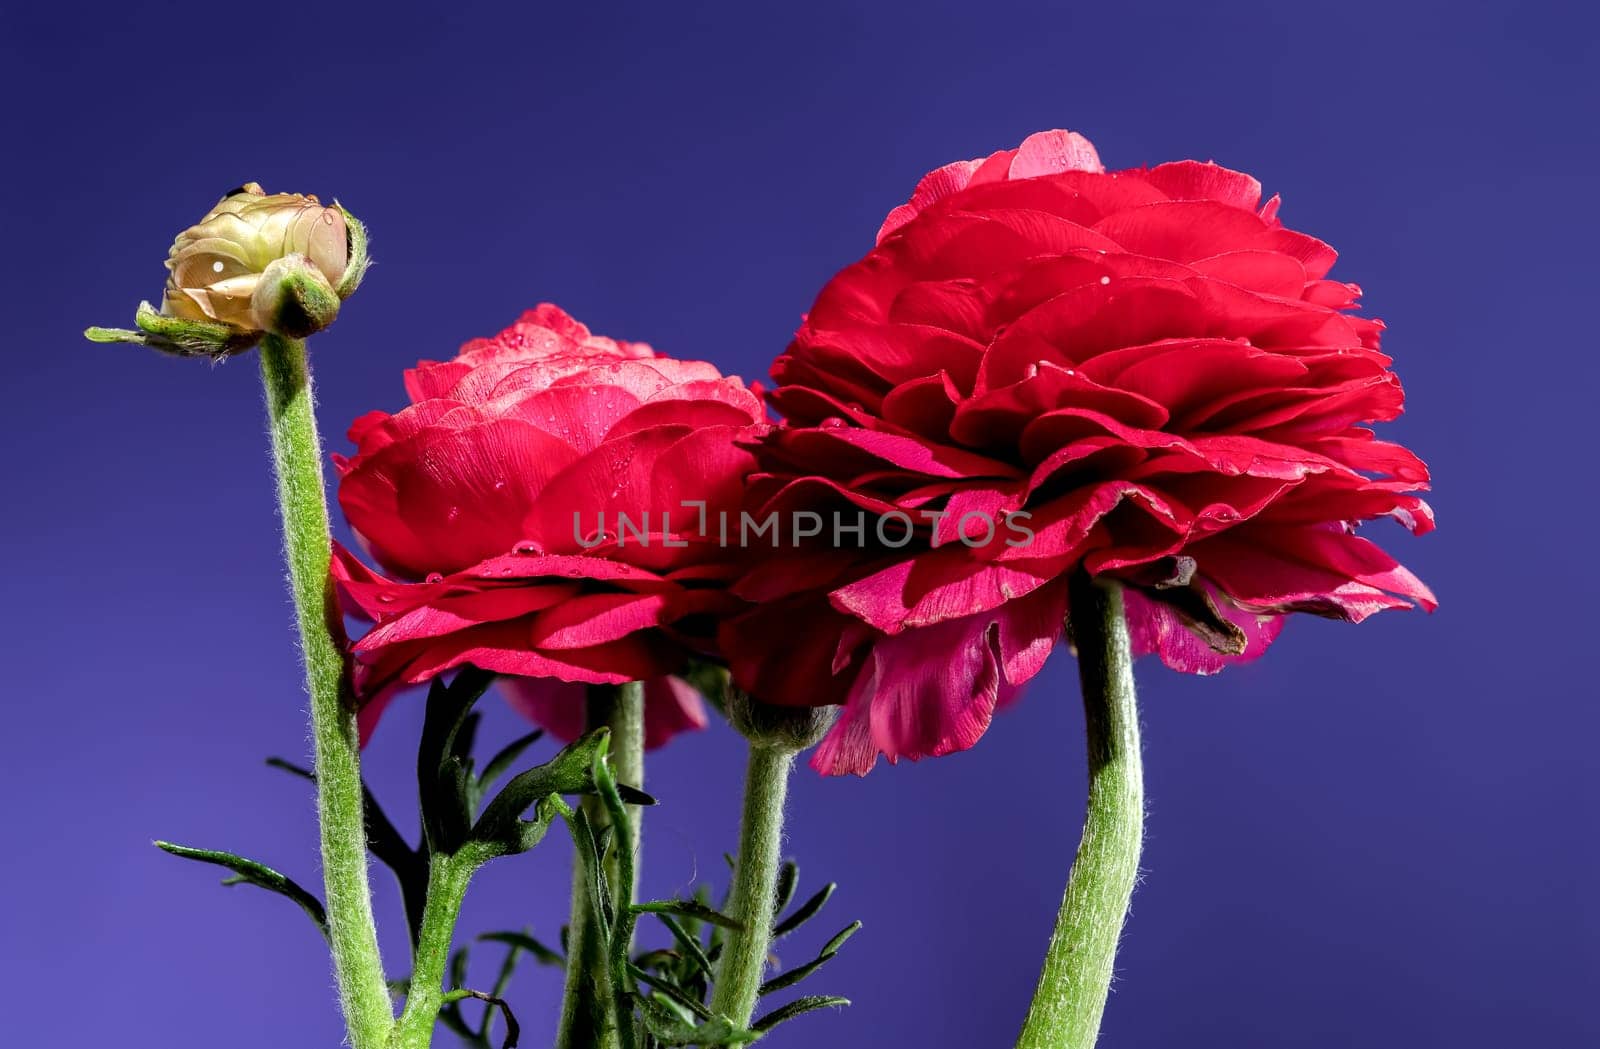 Beautiful blooming red ranunculus flower on a blue background. Flower head close-up.